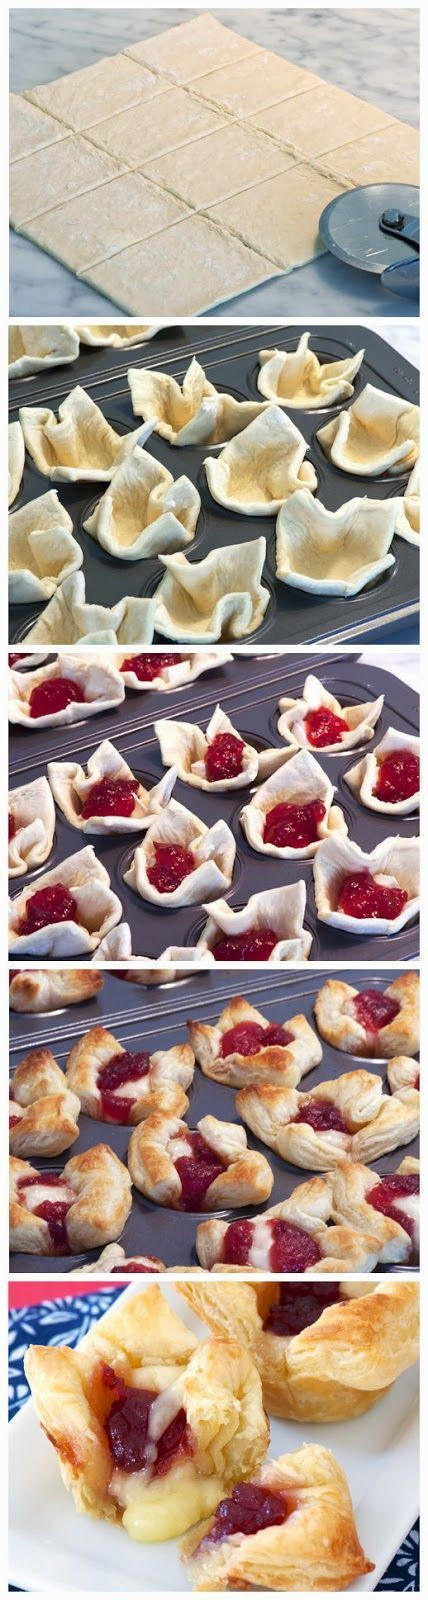 Good Christmas Appetizers
 17 Best ideas about Puff Pastry Appetizers on Pinterest